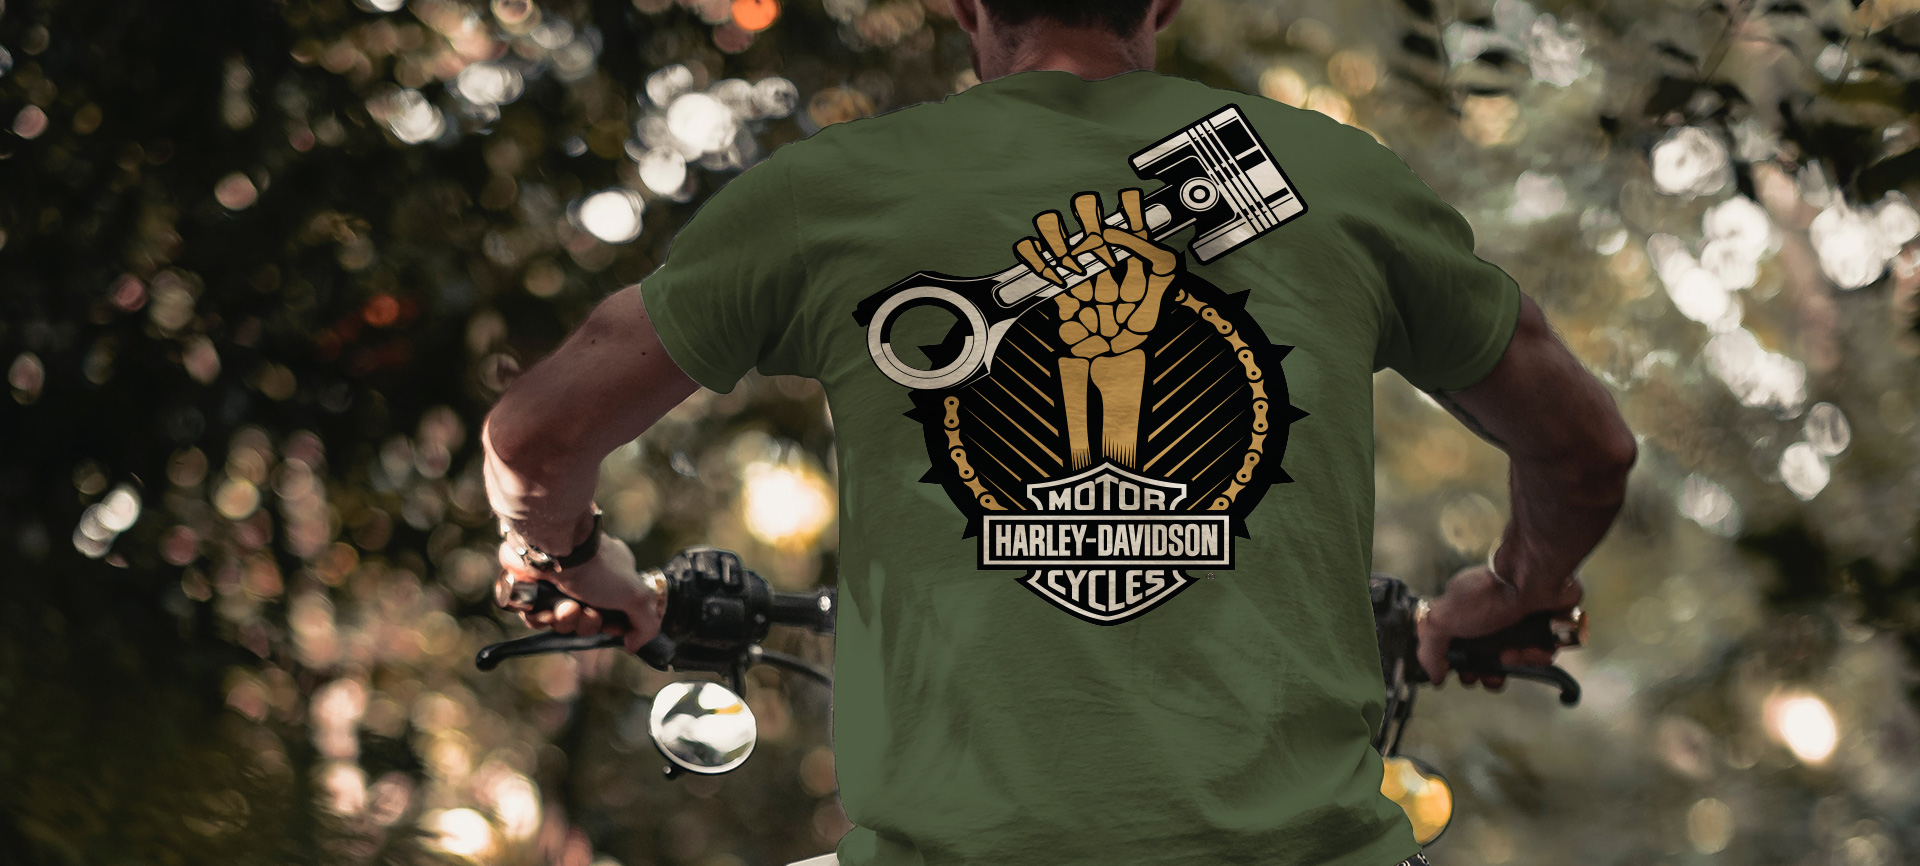 Man on motorcycle wearing a shirt with a skeleton hand holding a piston.